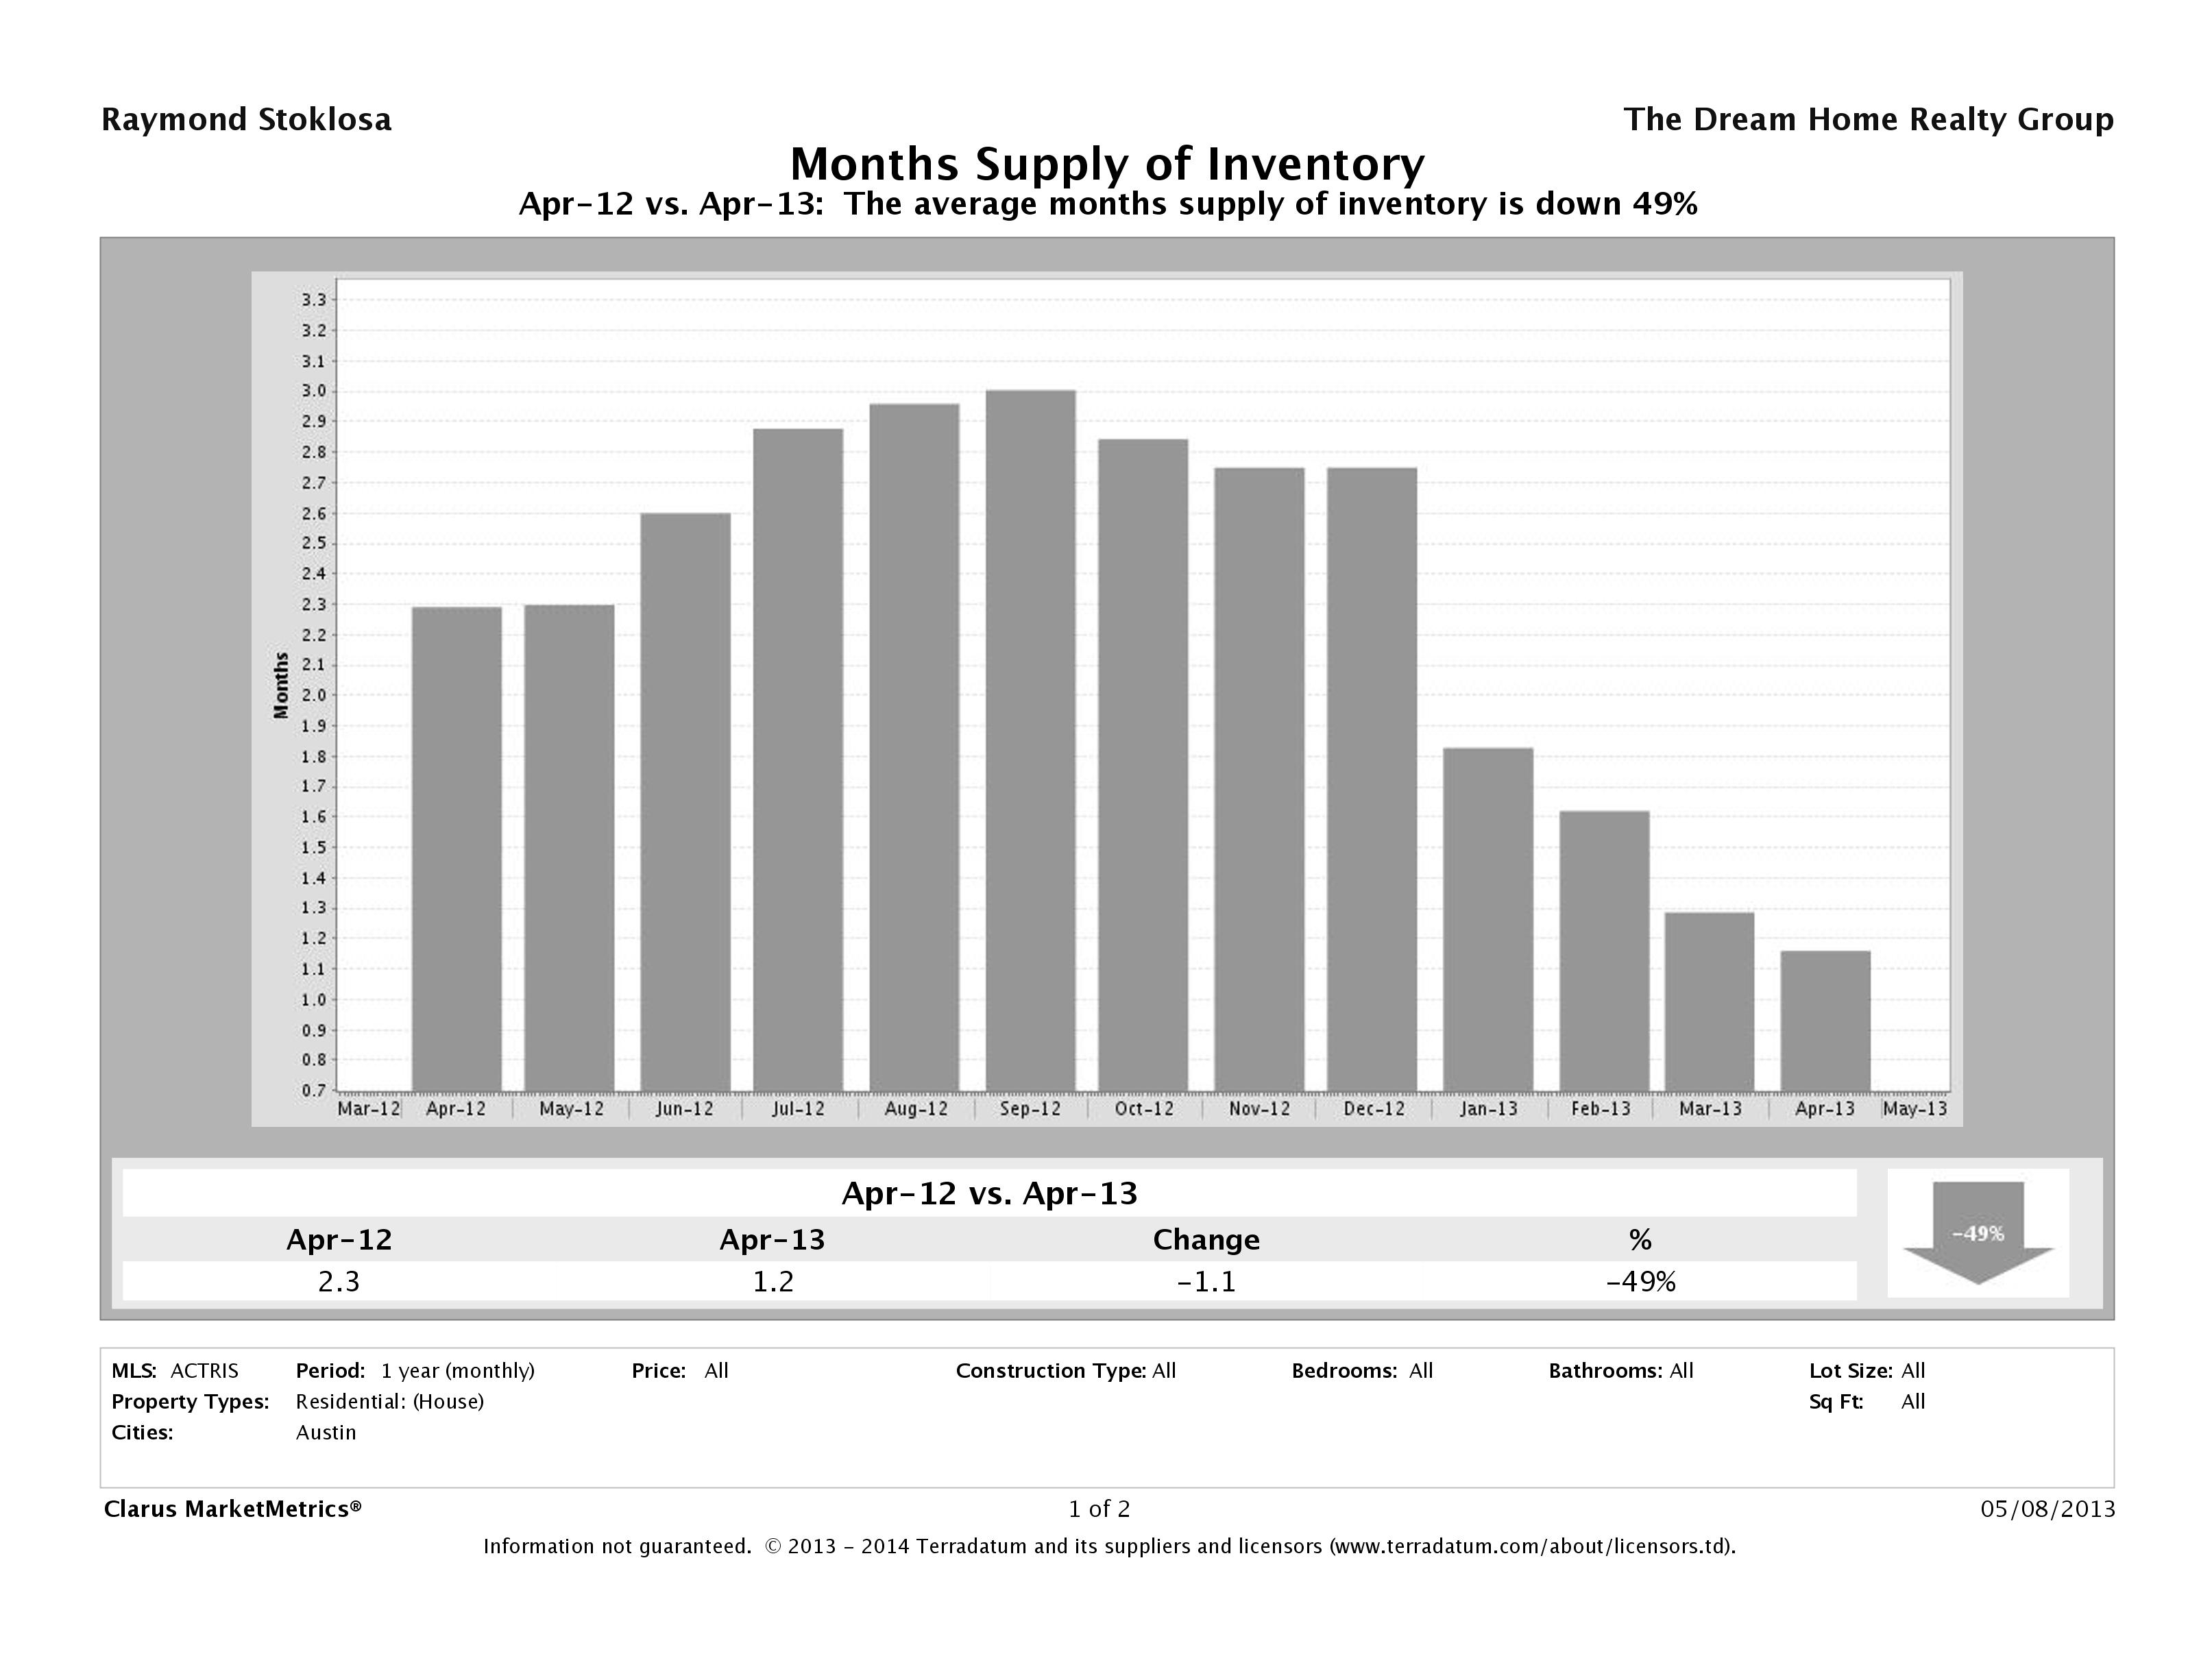 Austin single family home months inventory April 2013